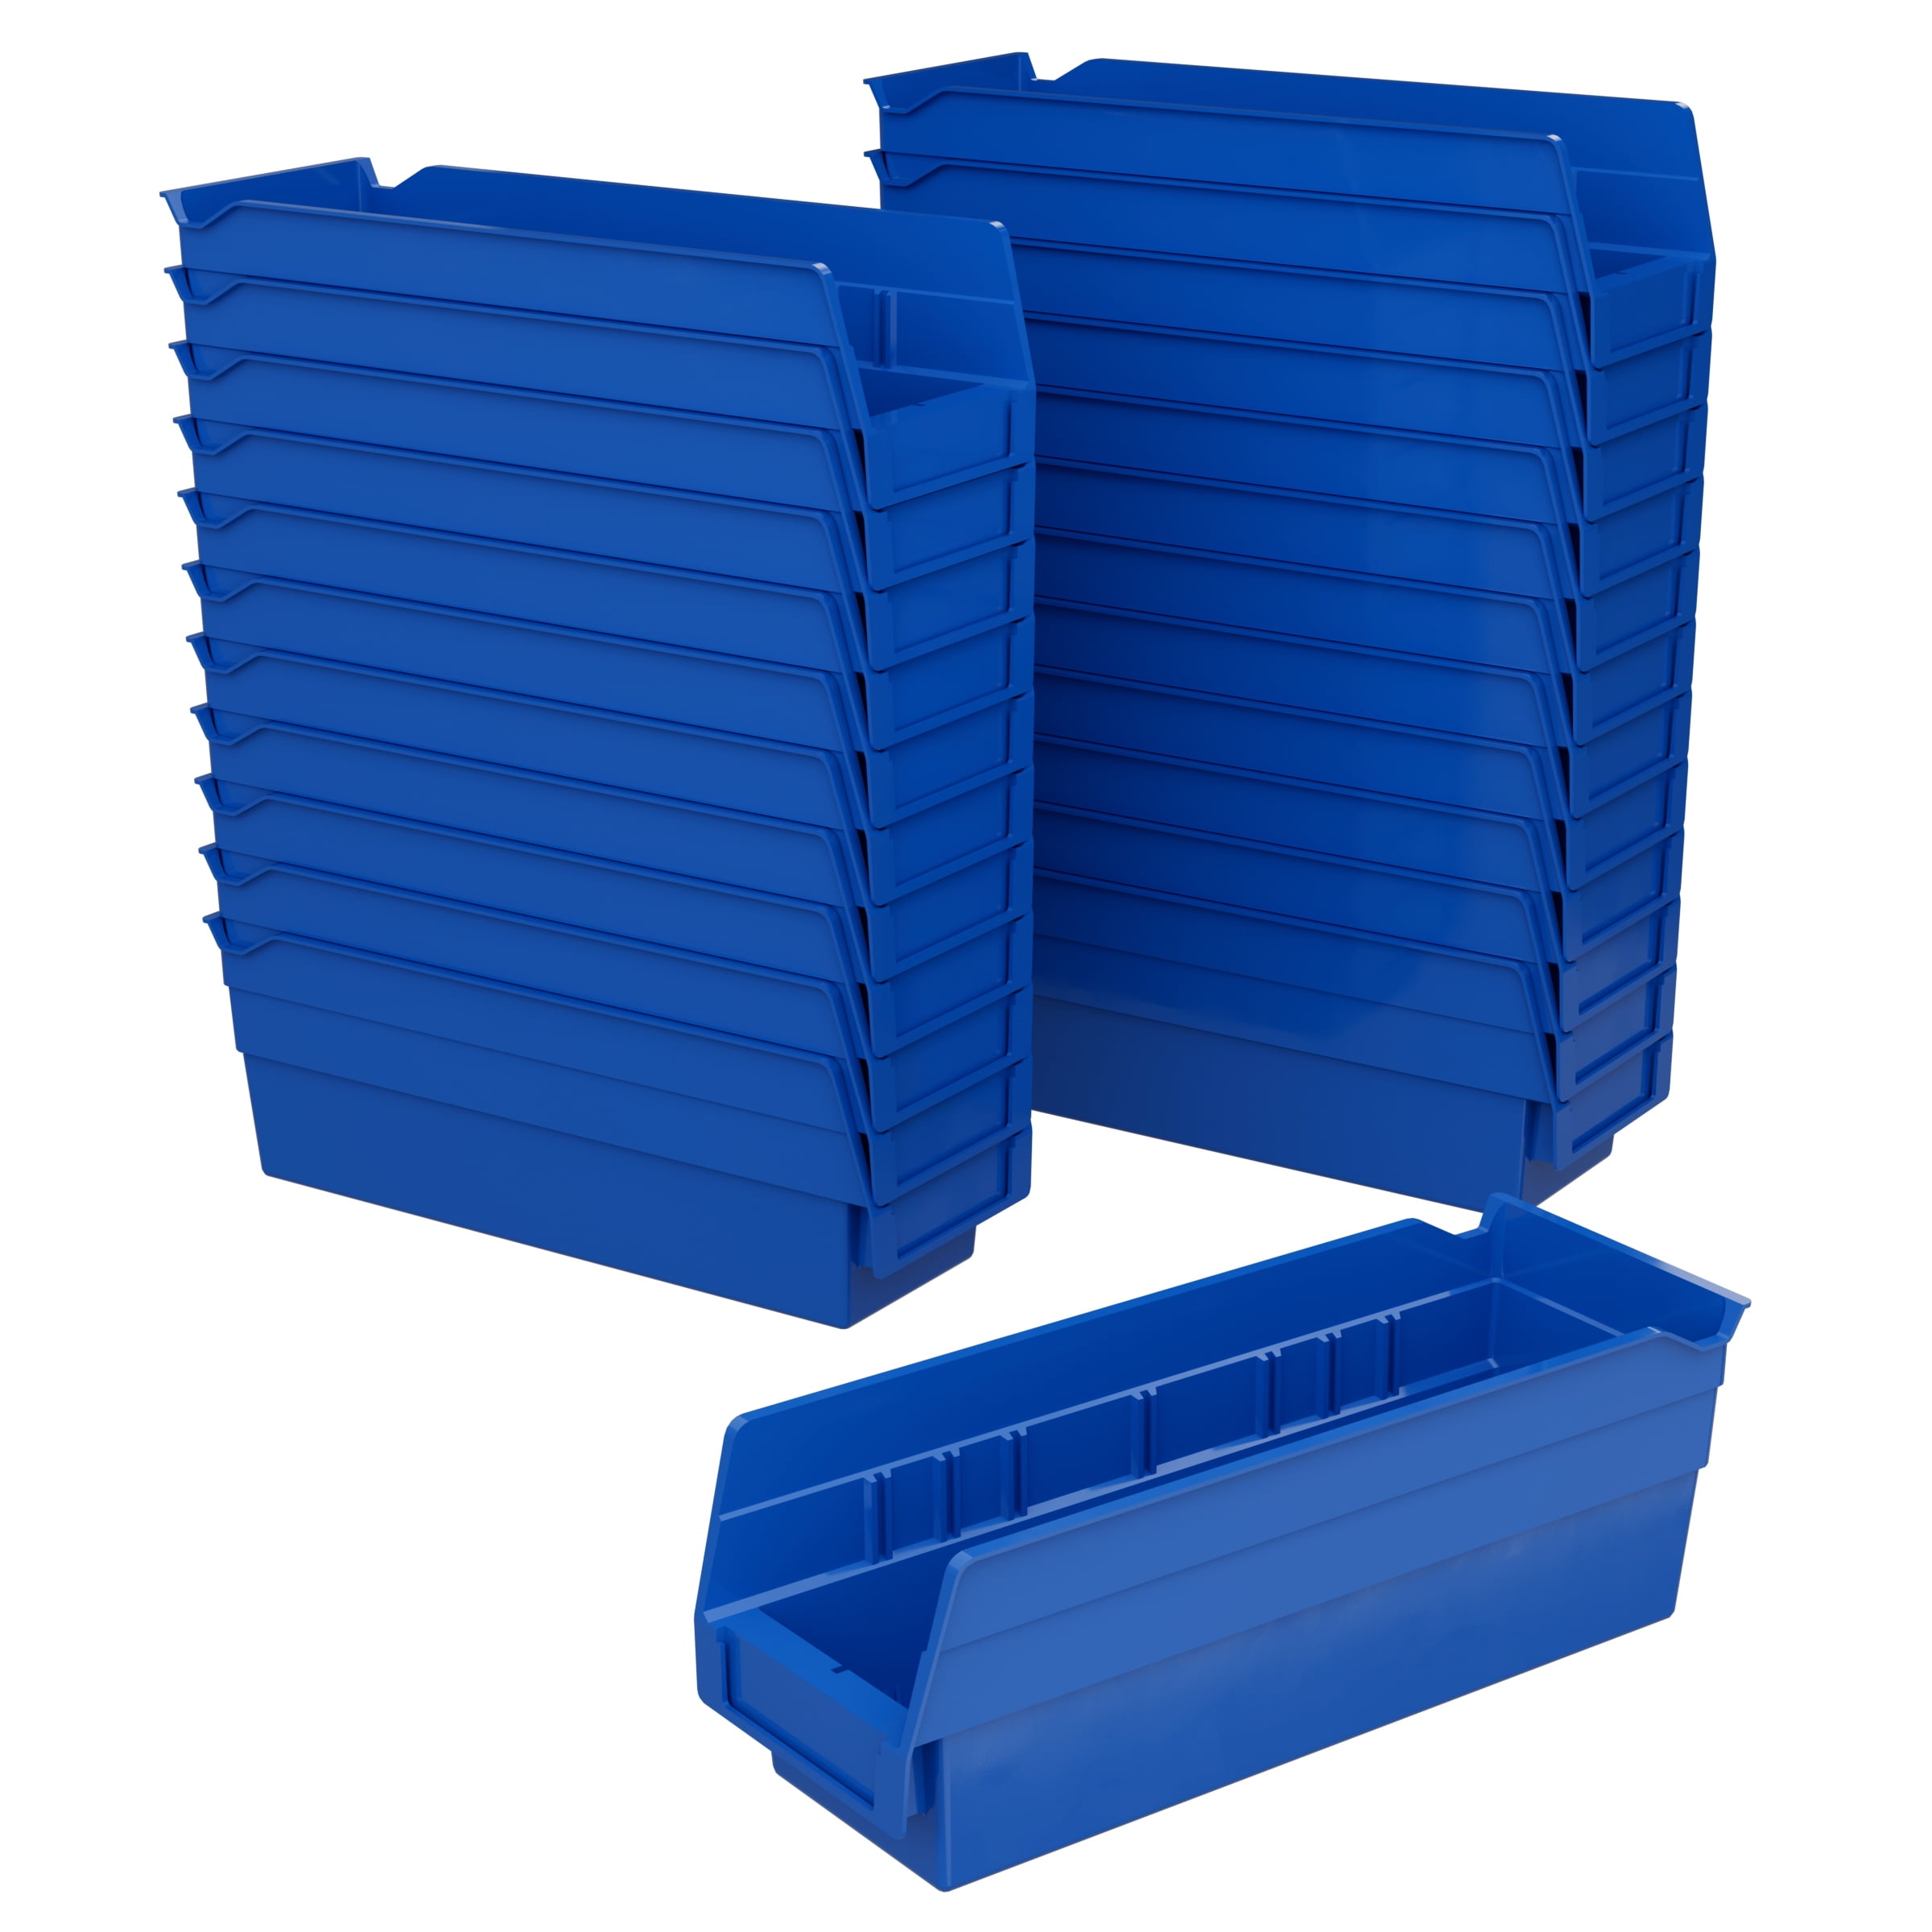  Akro-Mils 30130 Plastic Organizer and Storage Bins for  Refrigerator, Kitchen, Cabinet, or Pantry Organization, 12-Inch x 6-Inch x  4-Inch, Blue, 12-Pack : Everything Else